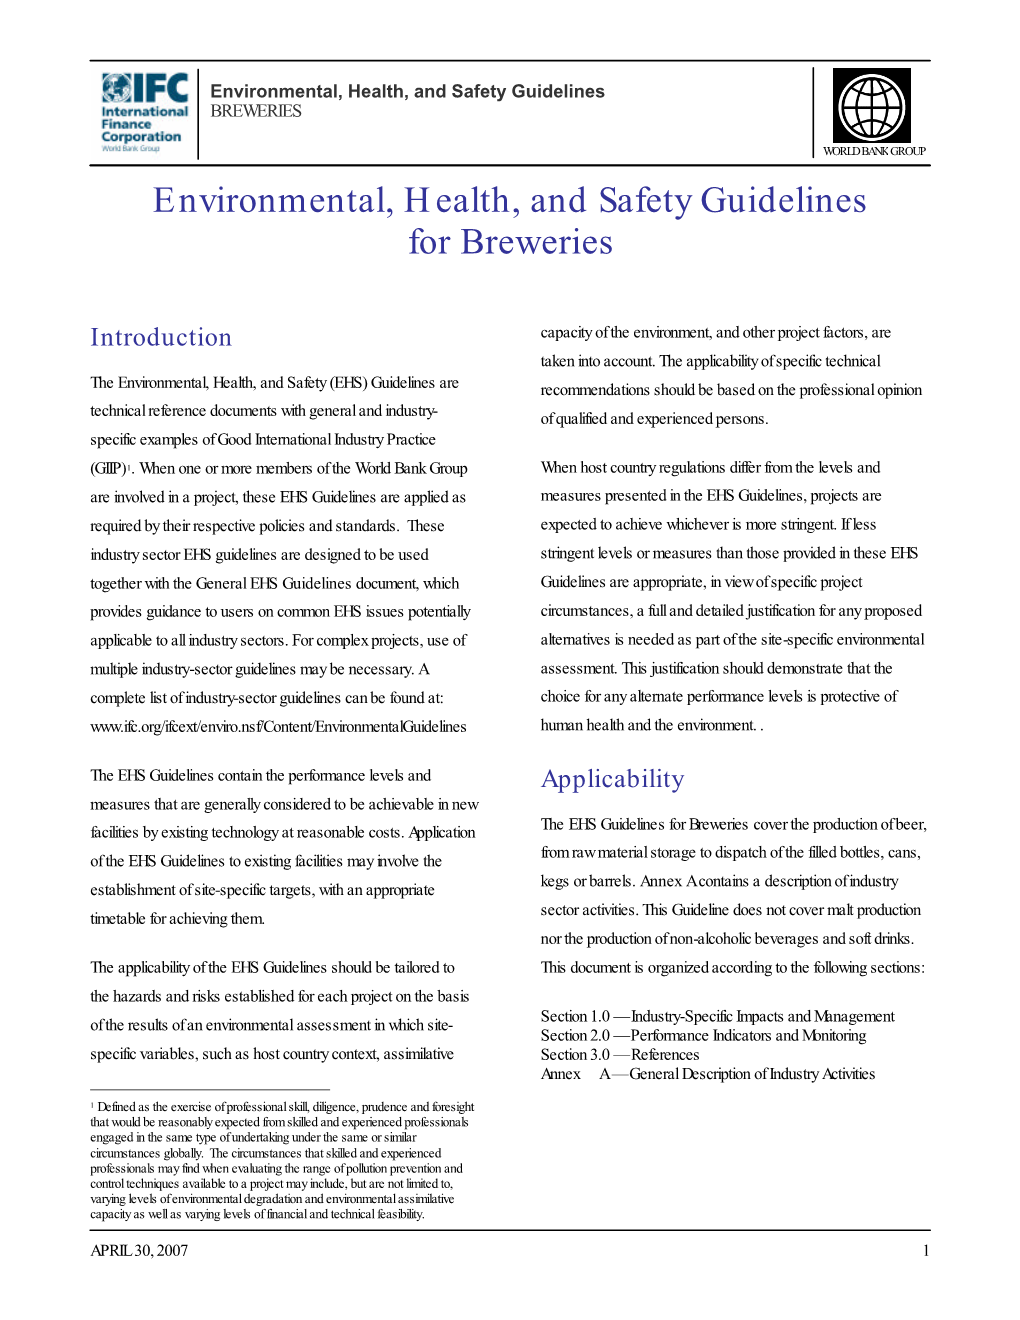 Environmental, Health, and Safety Guidelines for Breweries